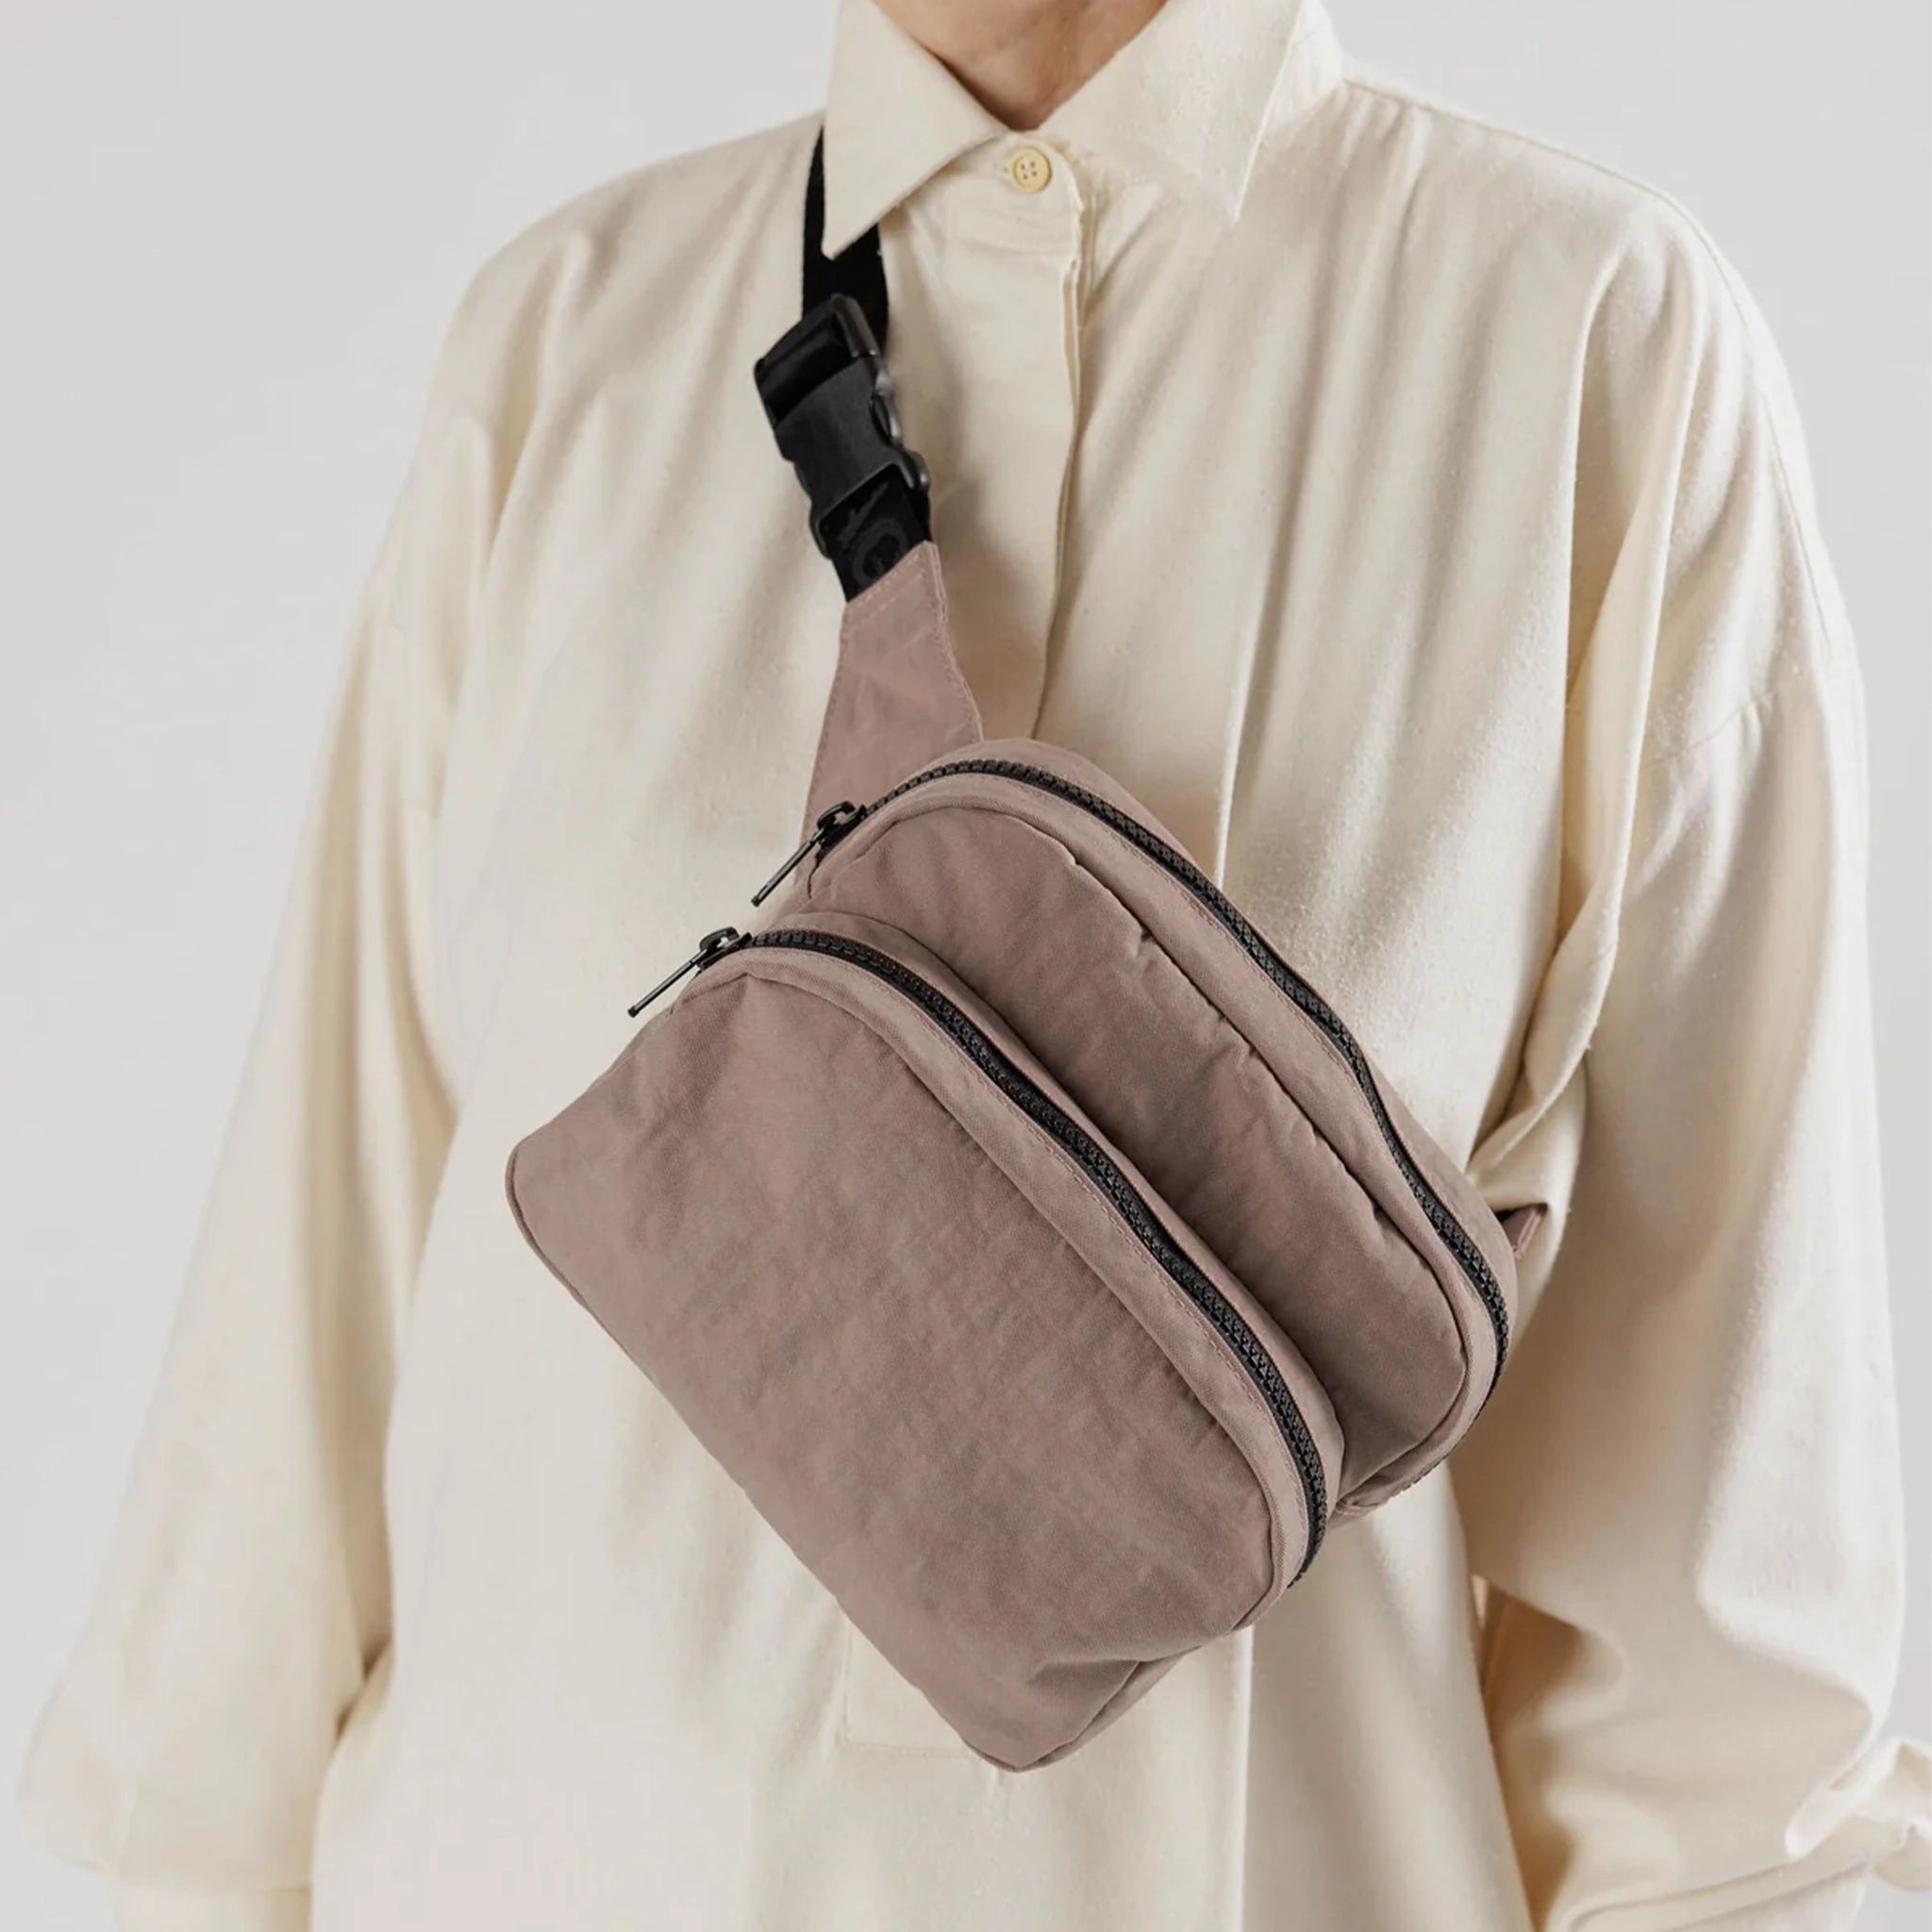  A taupe nylon fanny pack with two zipper pockets and a black adjustable strap modeled over someones shoulder and chest.